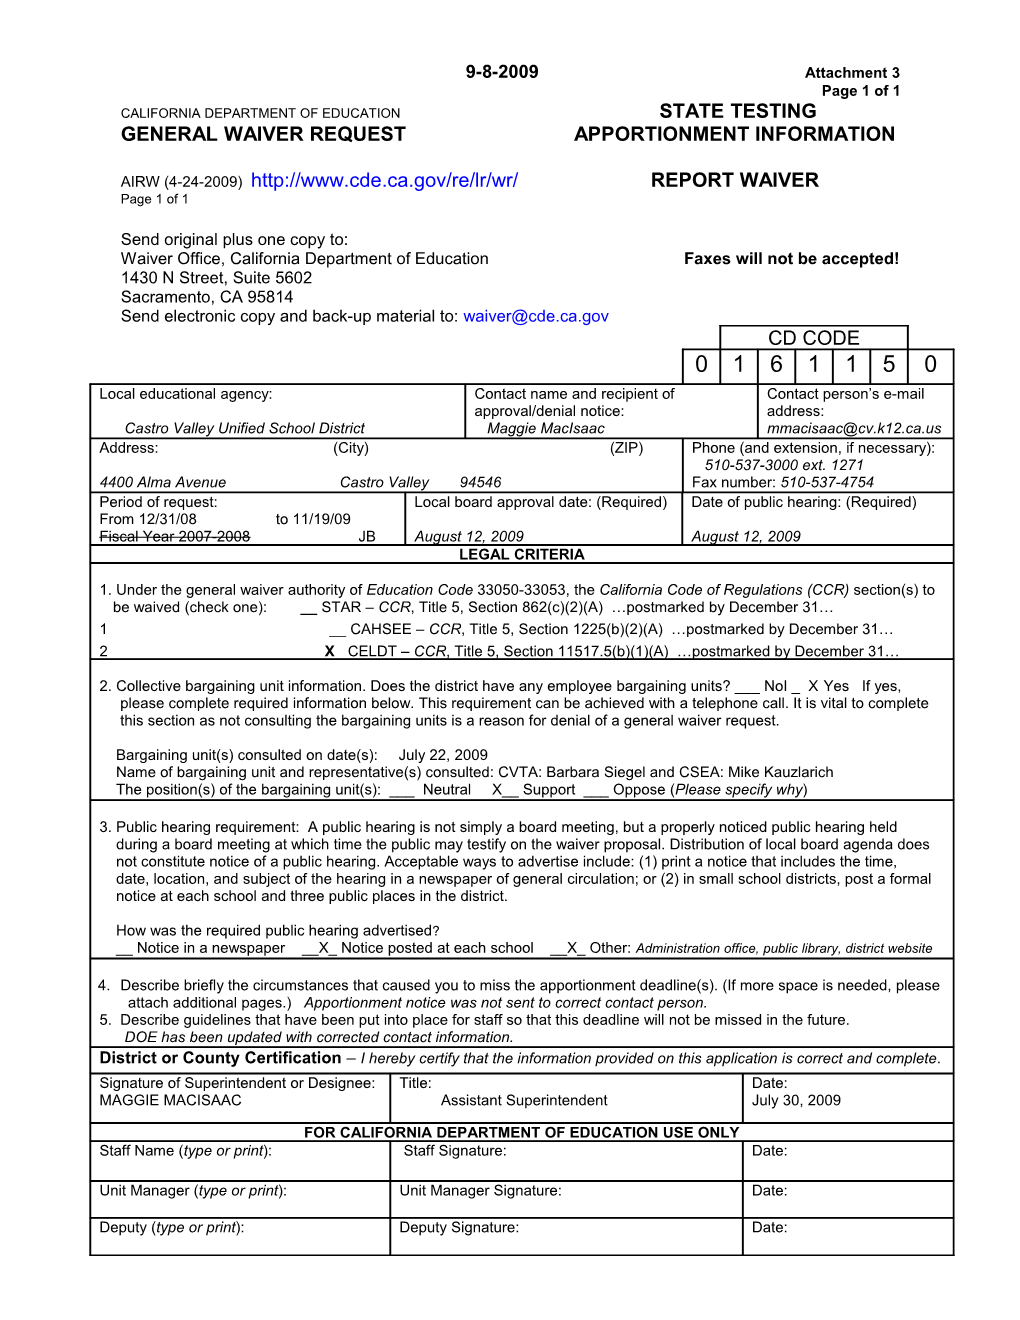 November 2009 Waiver Item WC11 Attachment 3 - Meeting Agendas (CA State Board of Education)